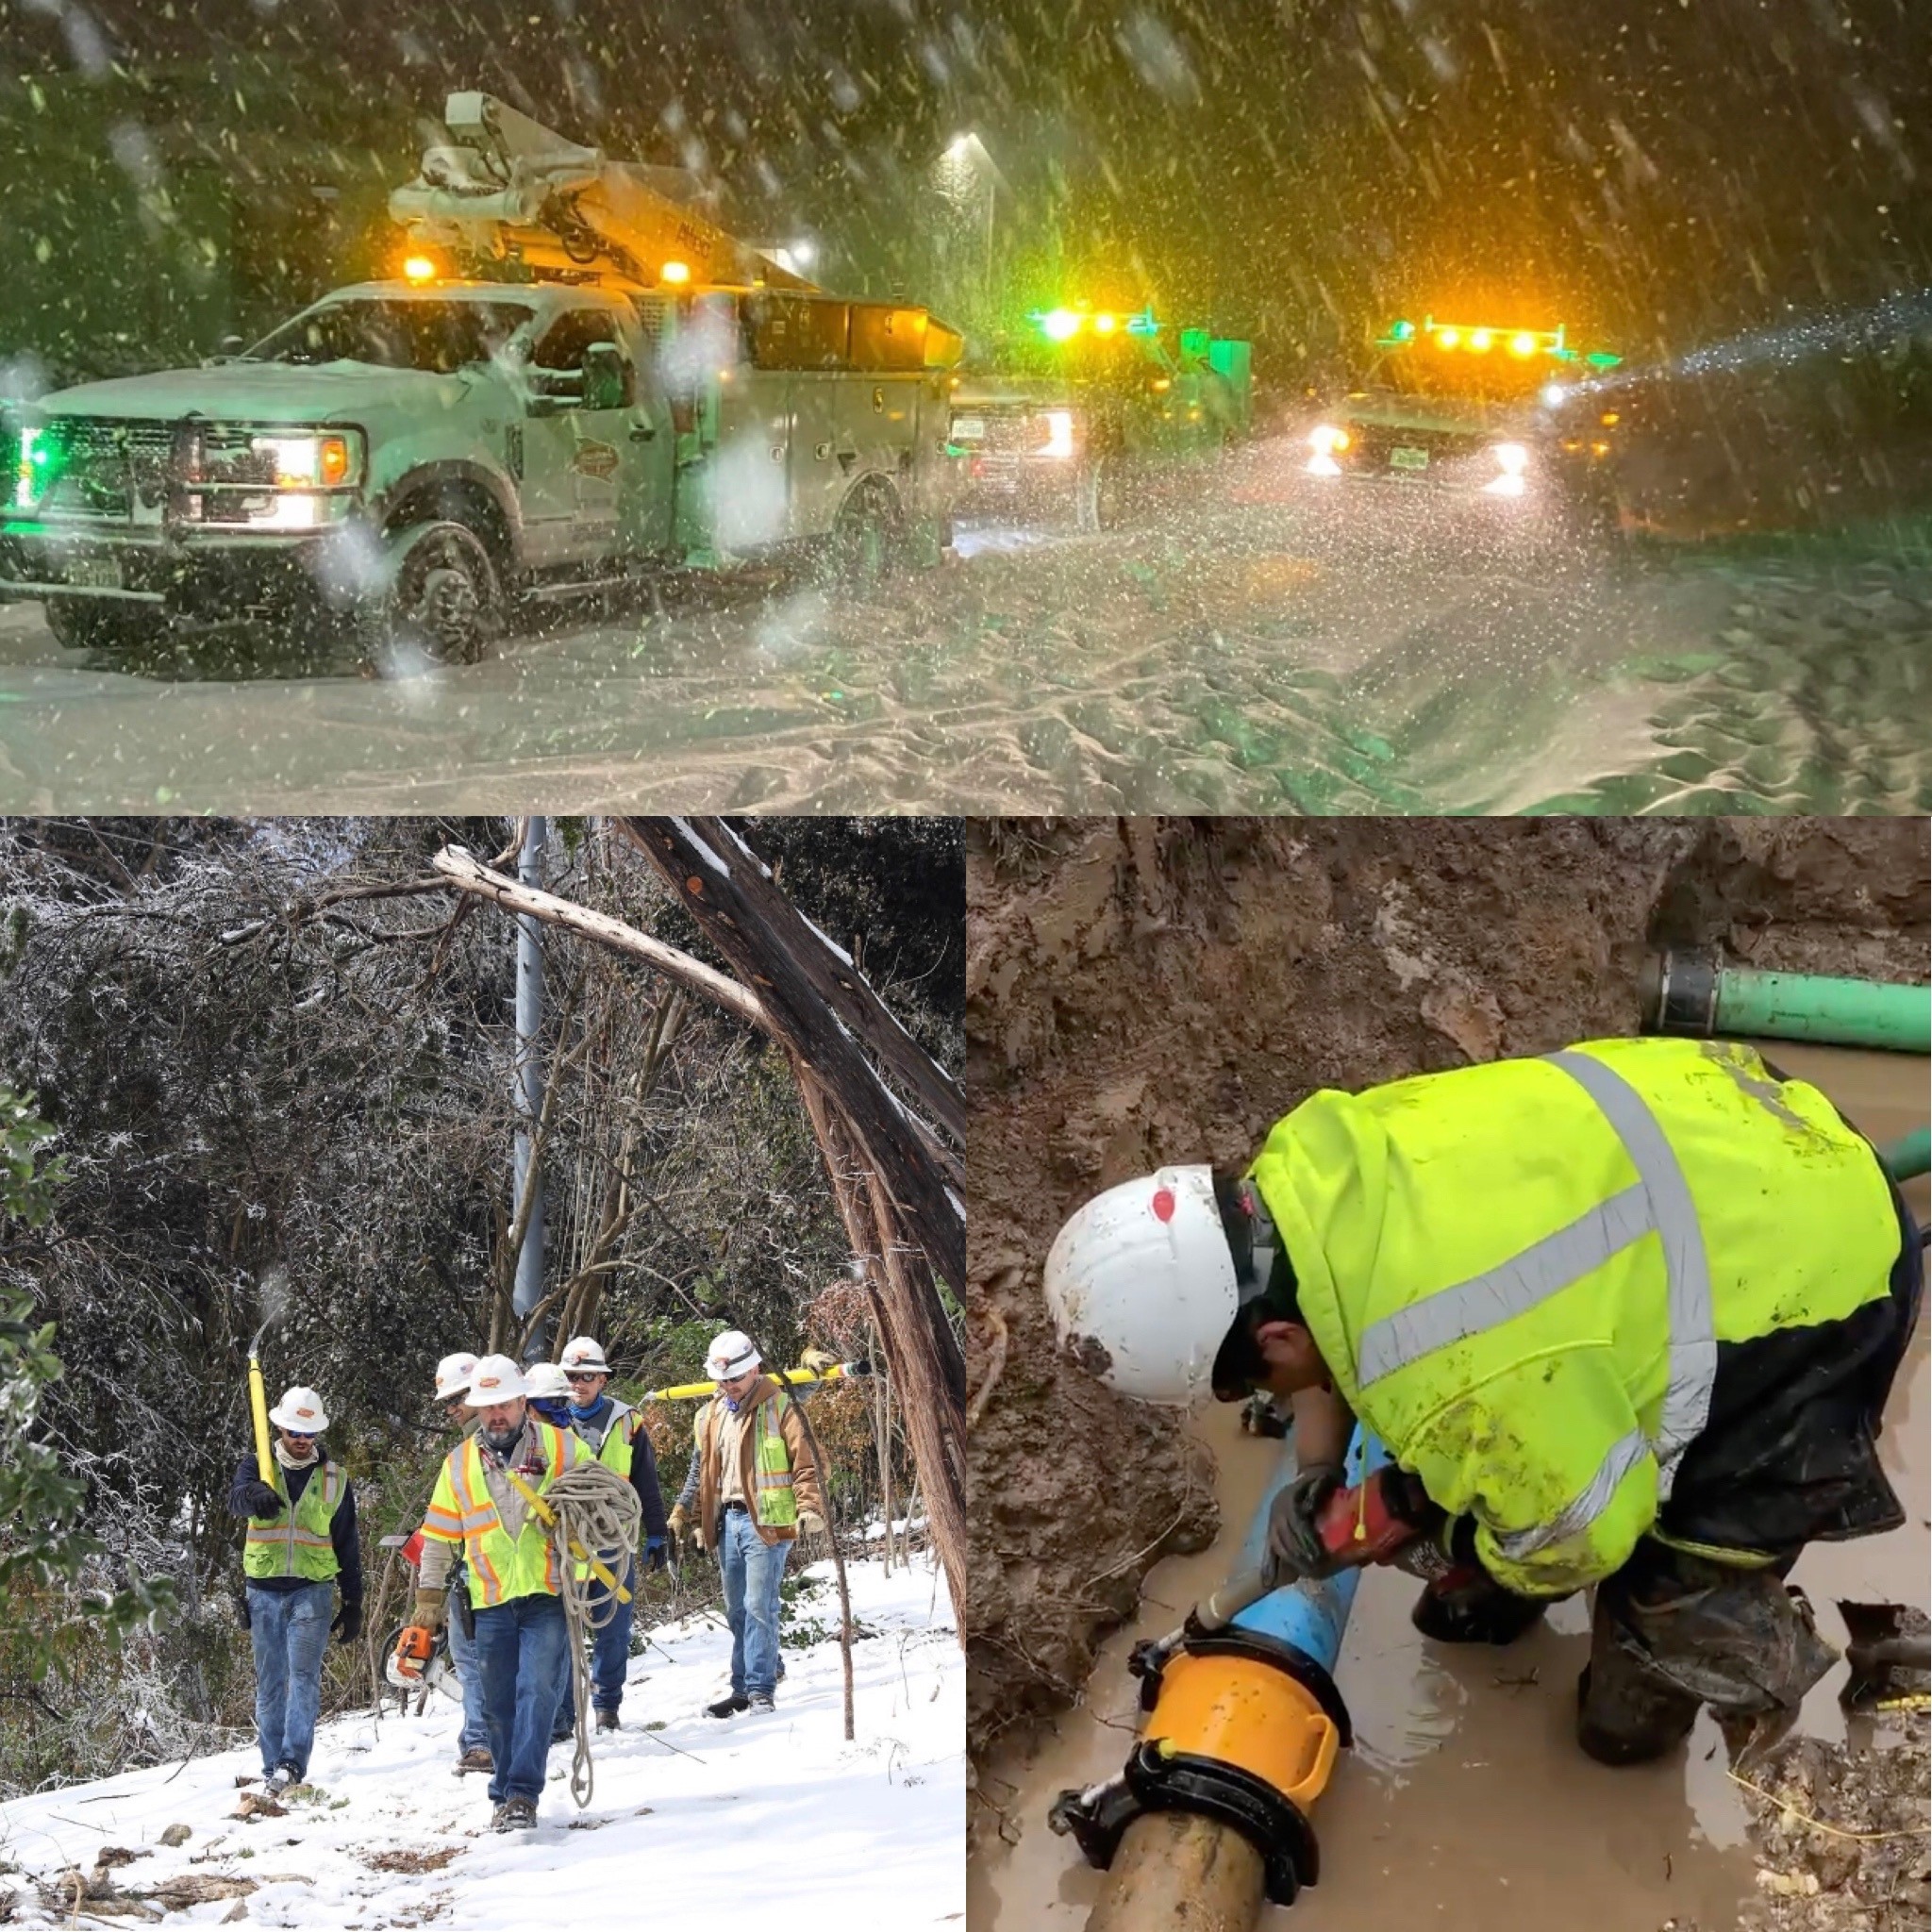 photos of city staff working in the snow, at night, and in knee-high water to fix broken infrastructure